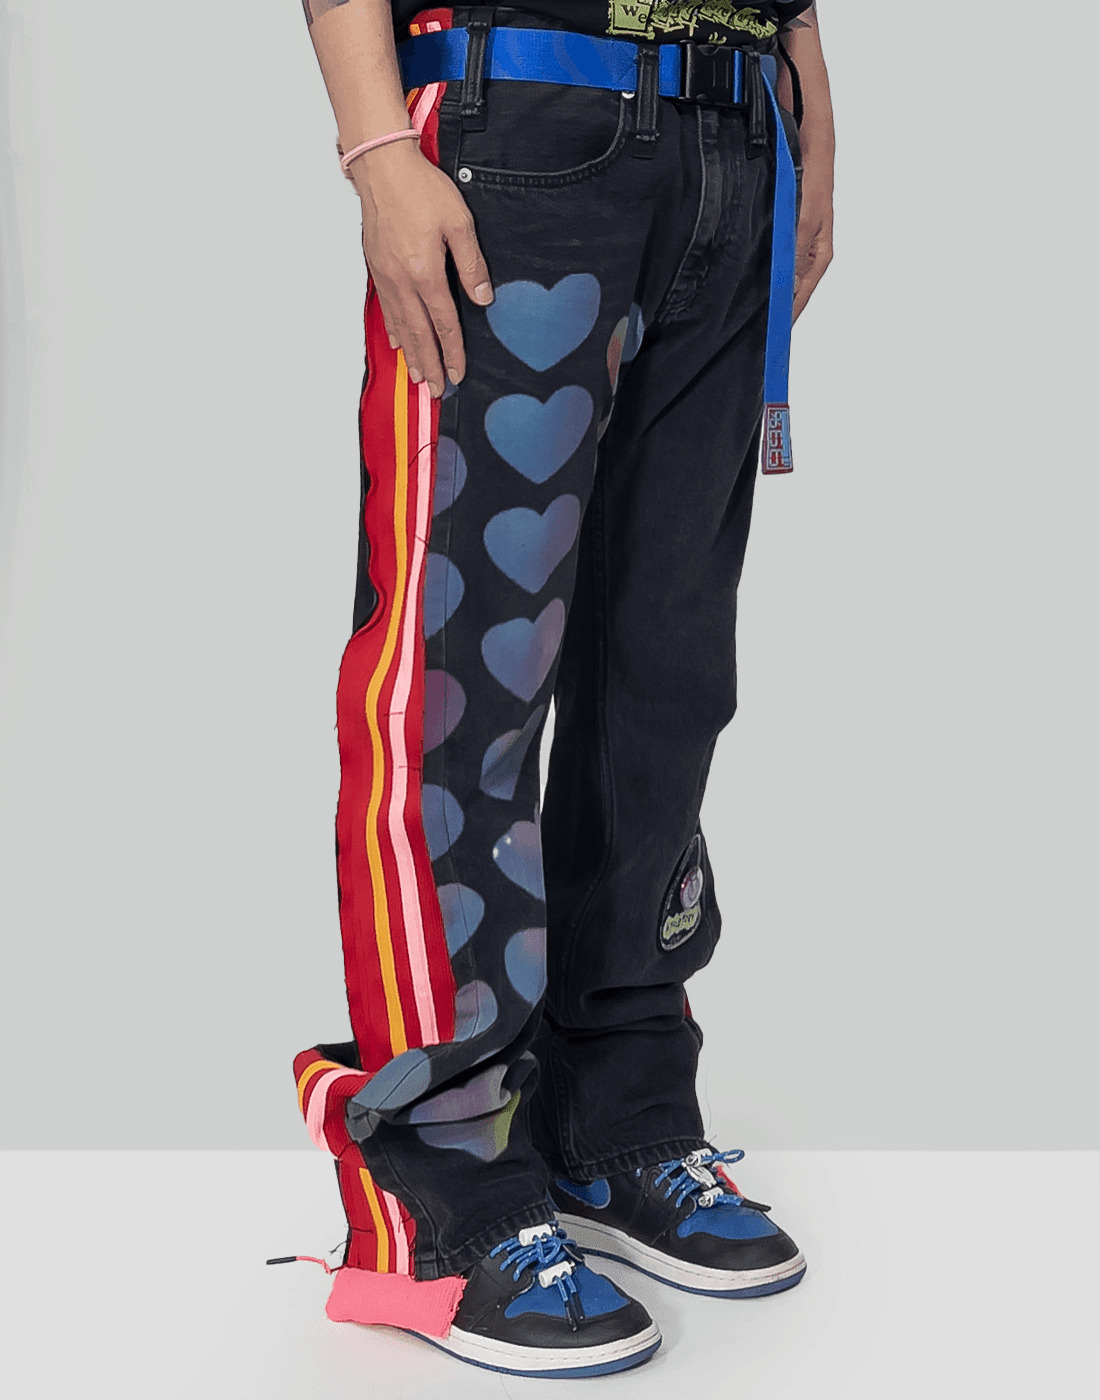 99%IS- Ribbed Heart Denim (Hand Made Custom For 1%) - 082plus